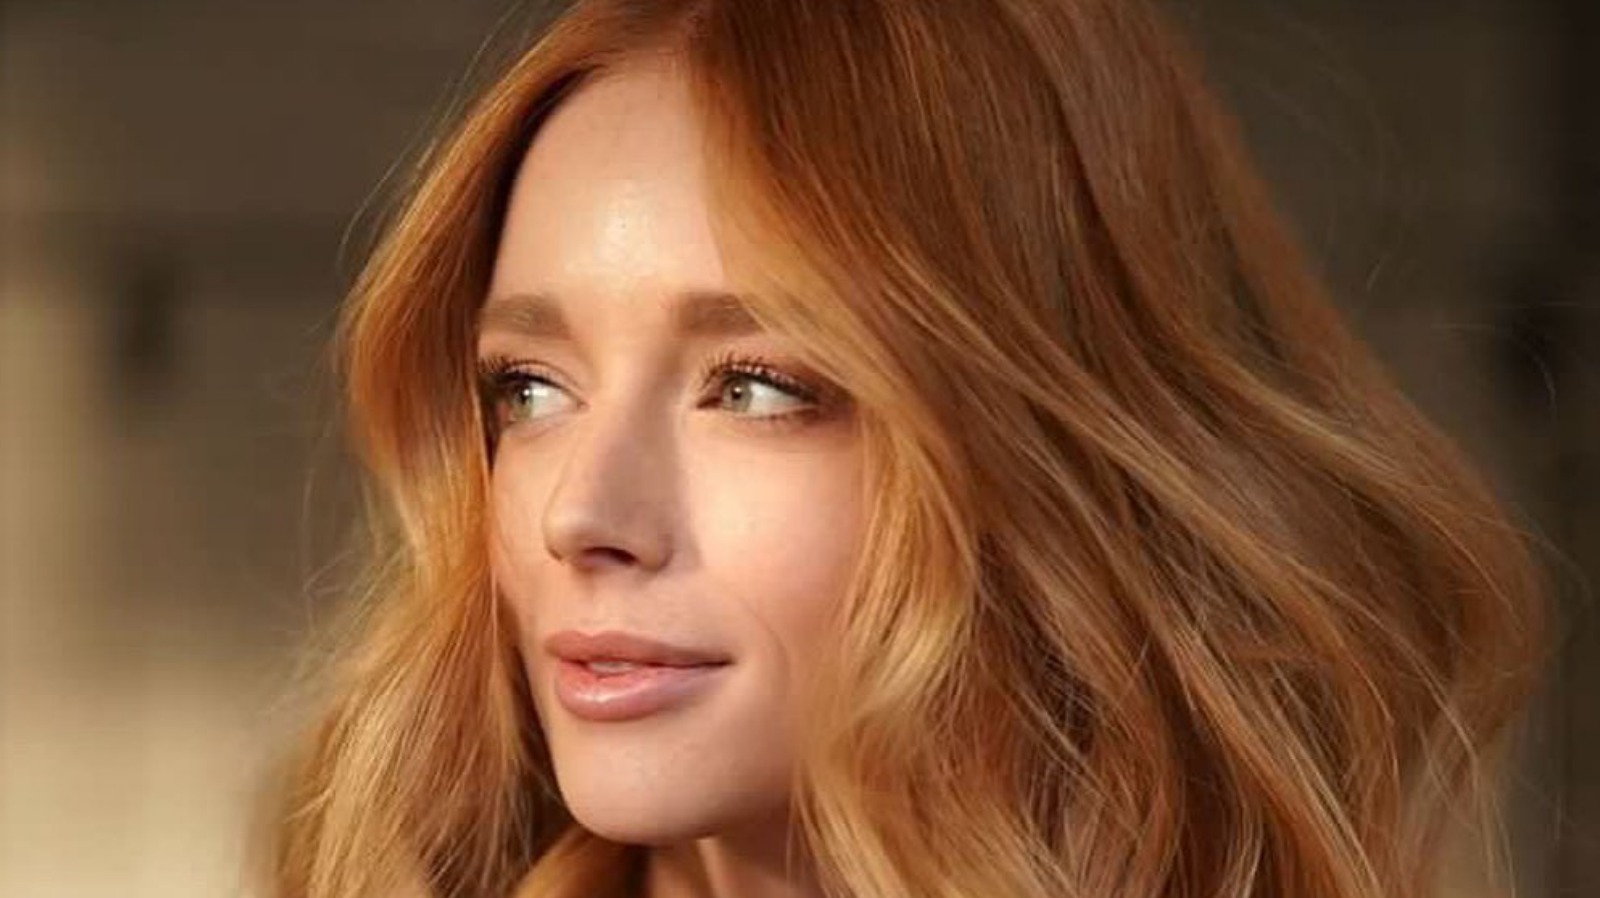 Makeup That Will Make Your Strawberry Blonde Hair Pop